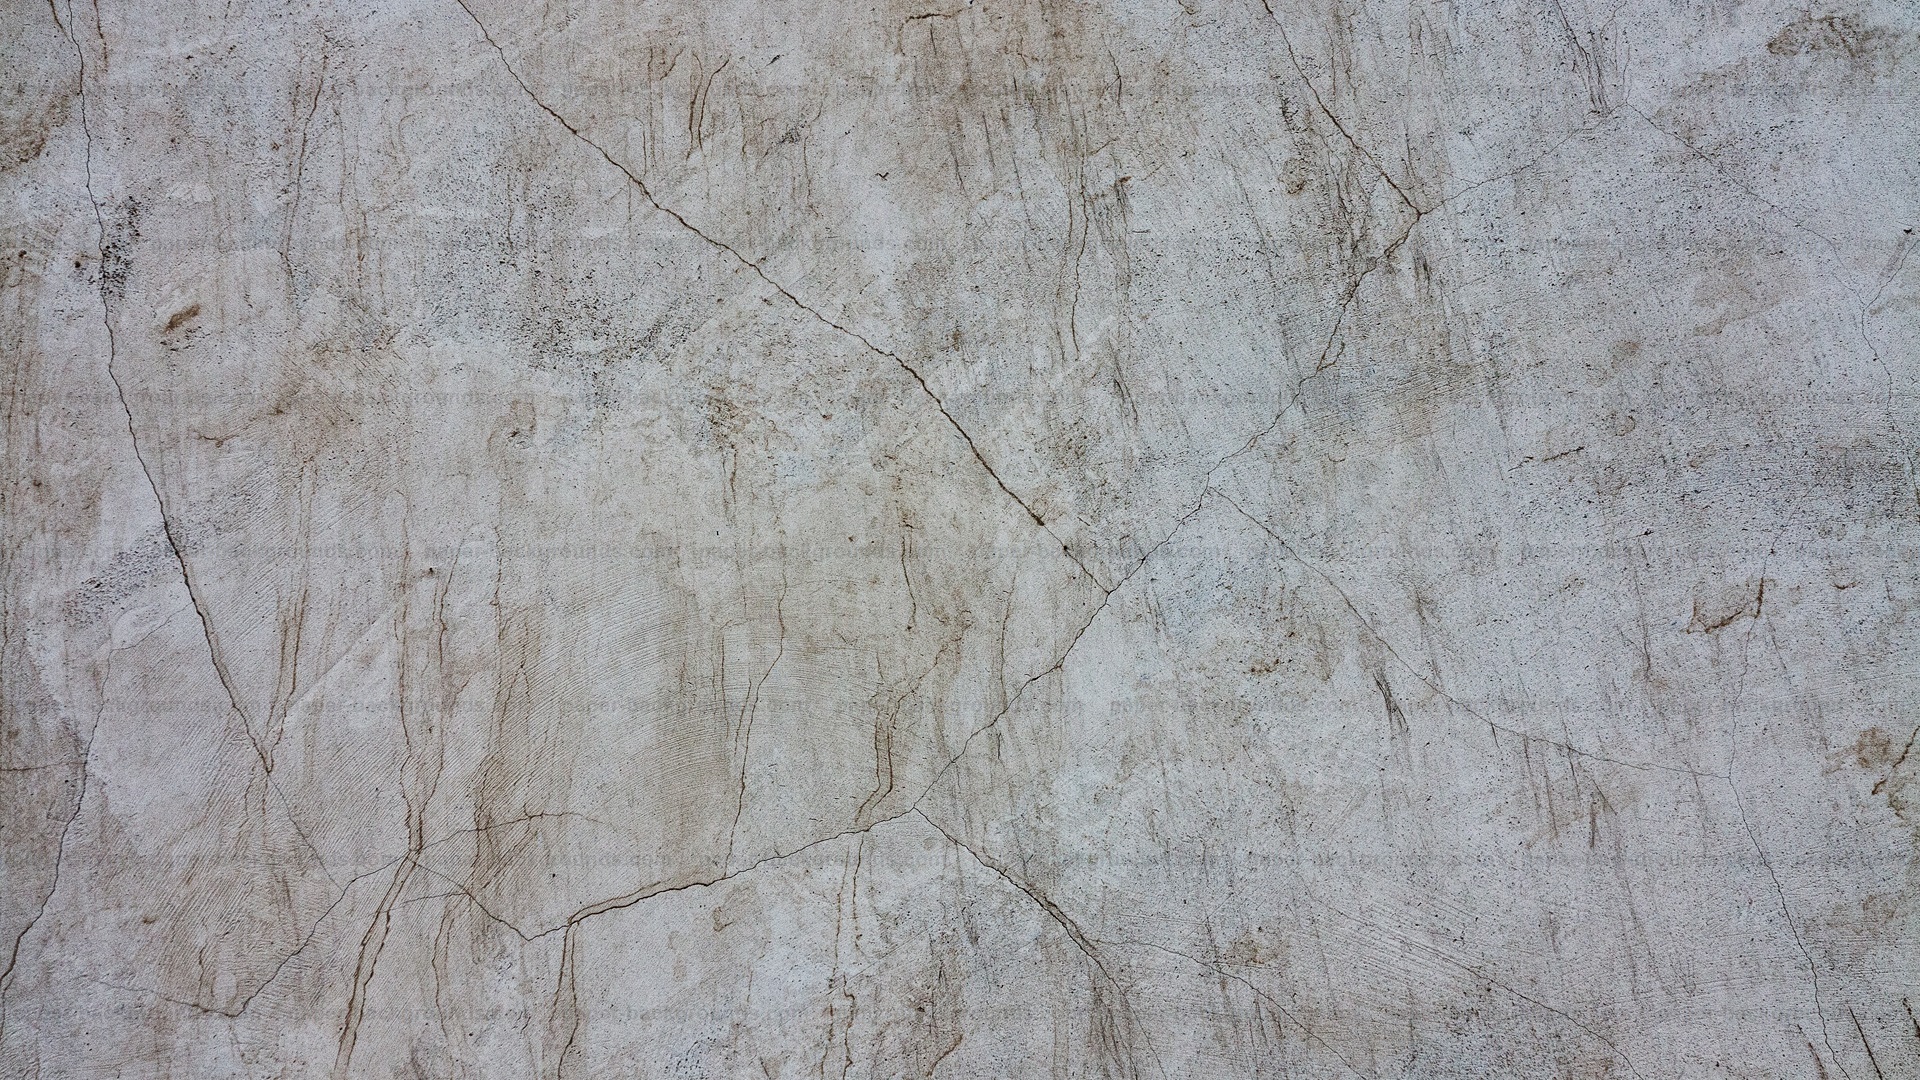 Cracked Dirty White Marble Wall Background HD X 1080p Image